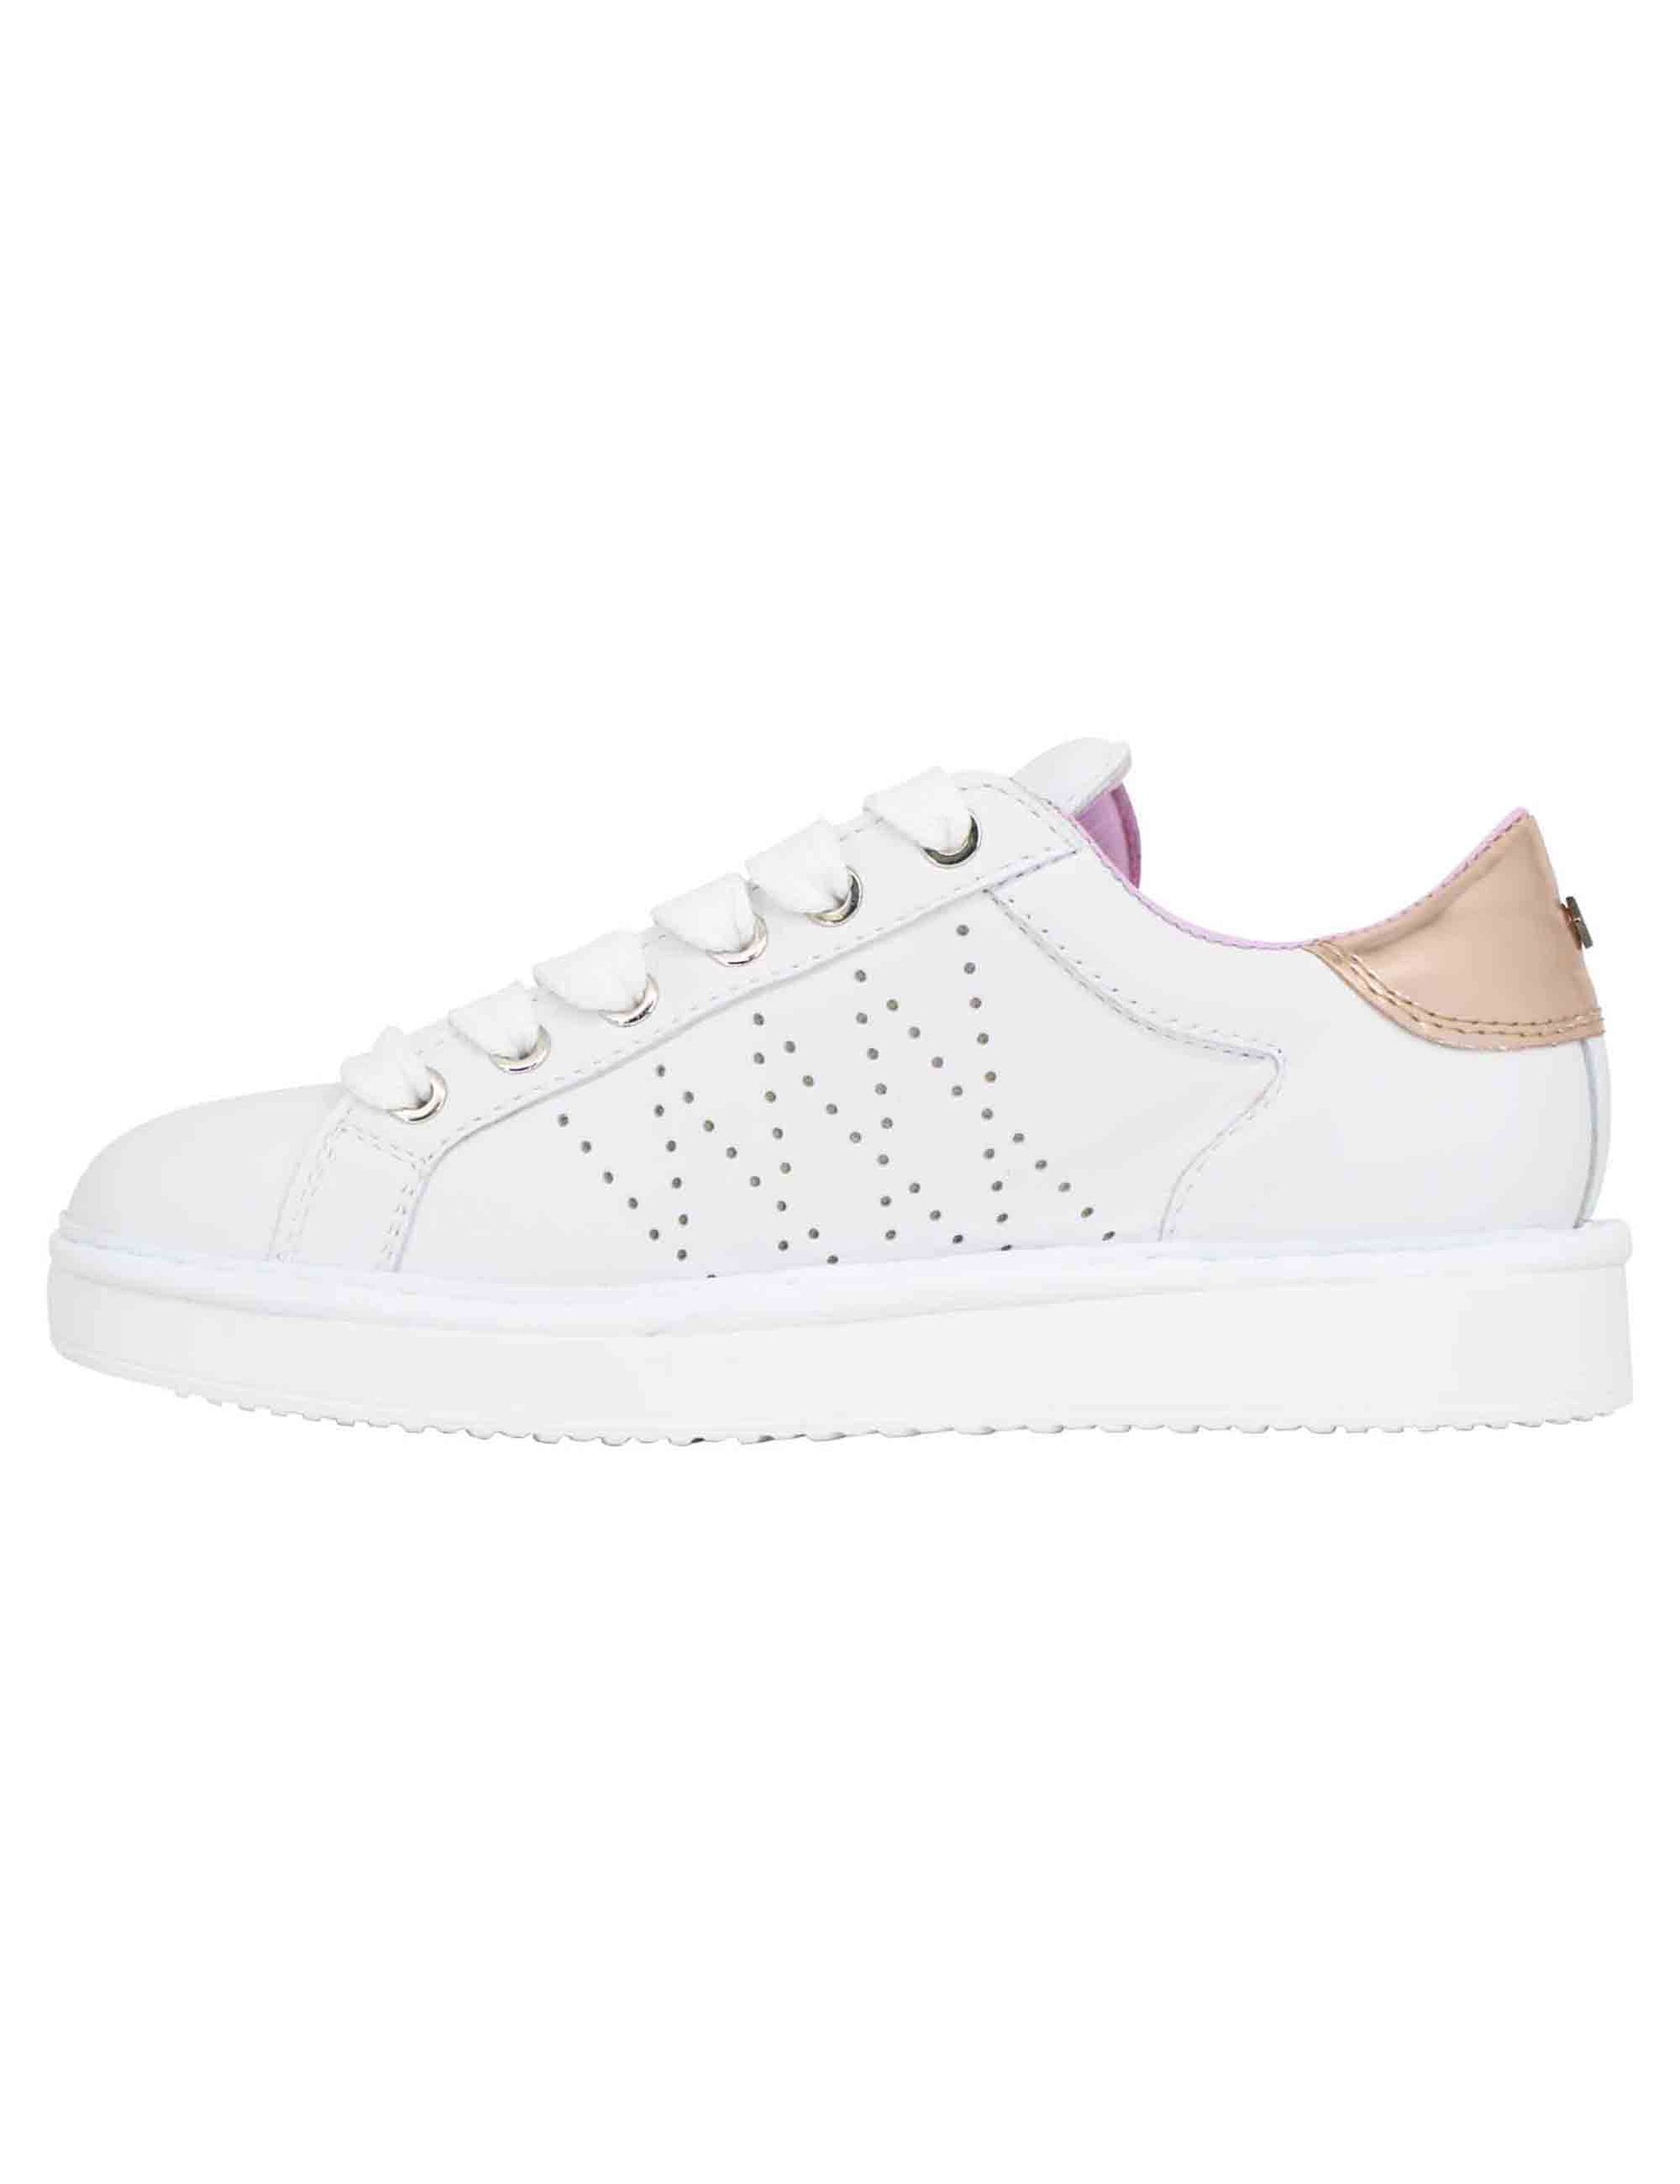 Women's white leather sneakers